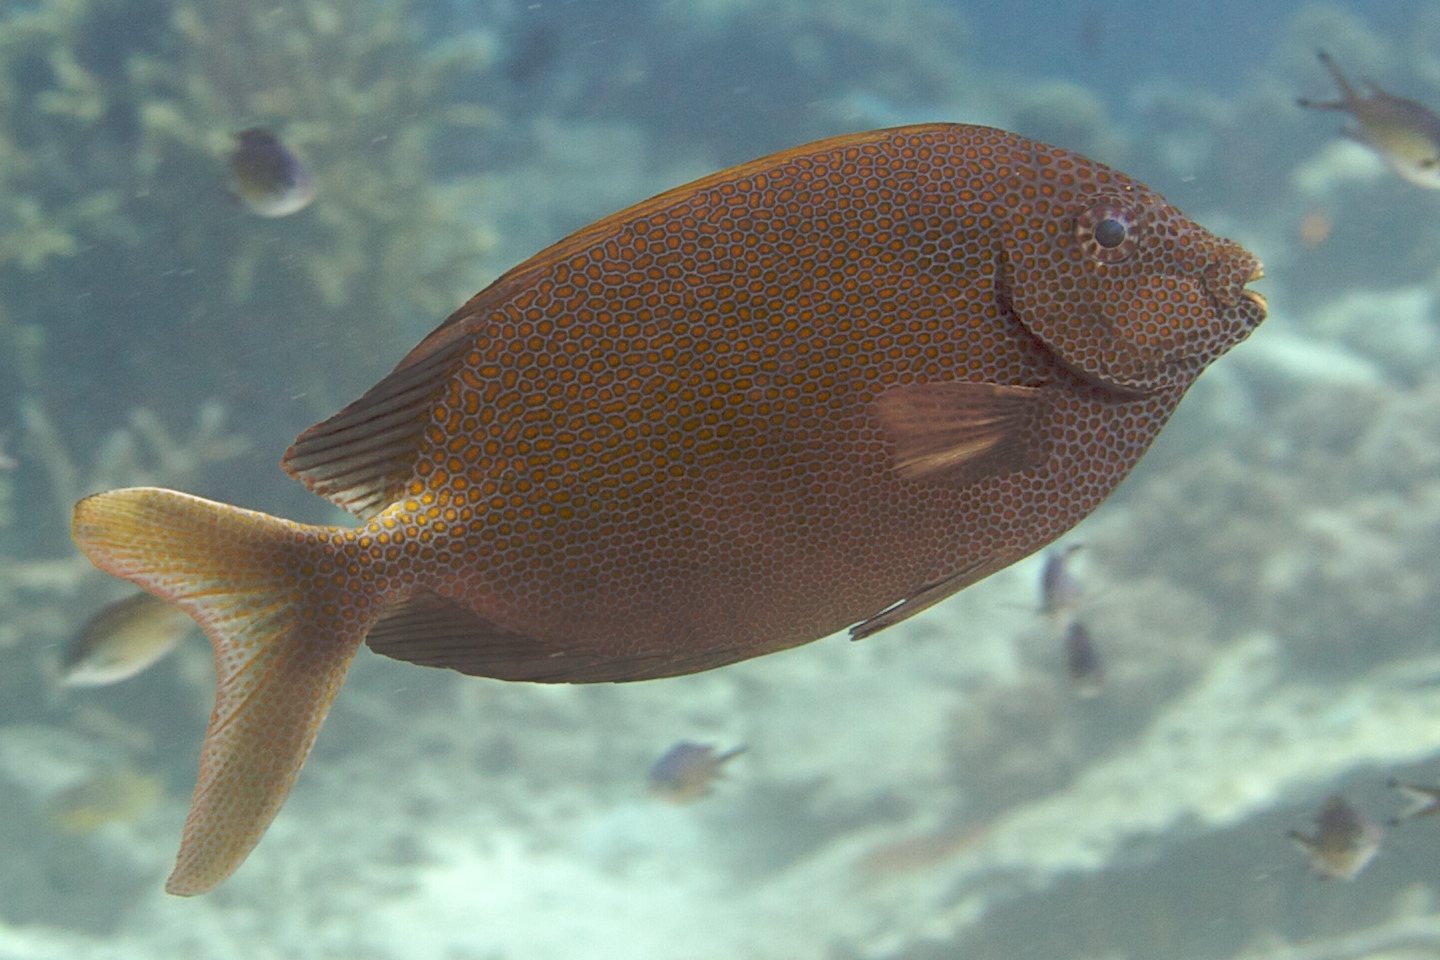 Gold-spotted rabbitfish